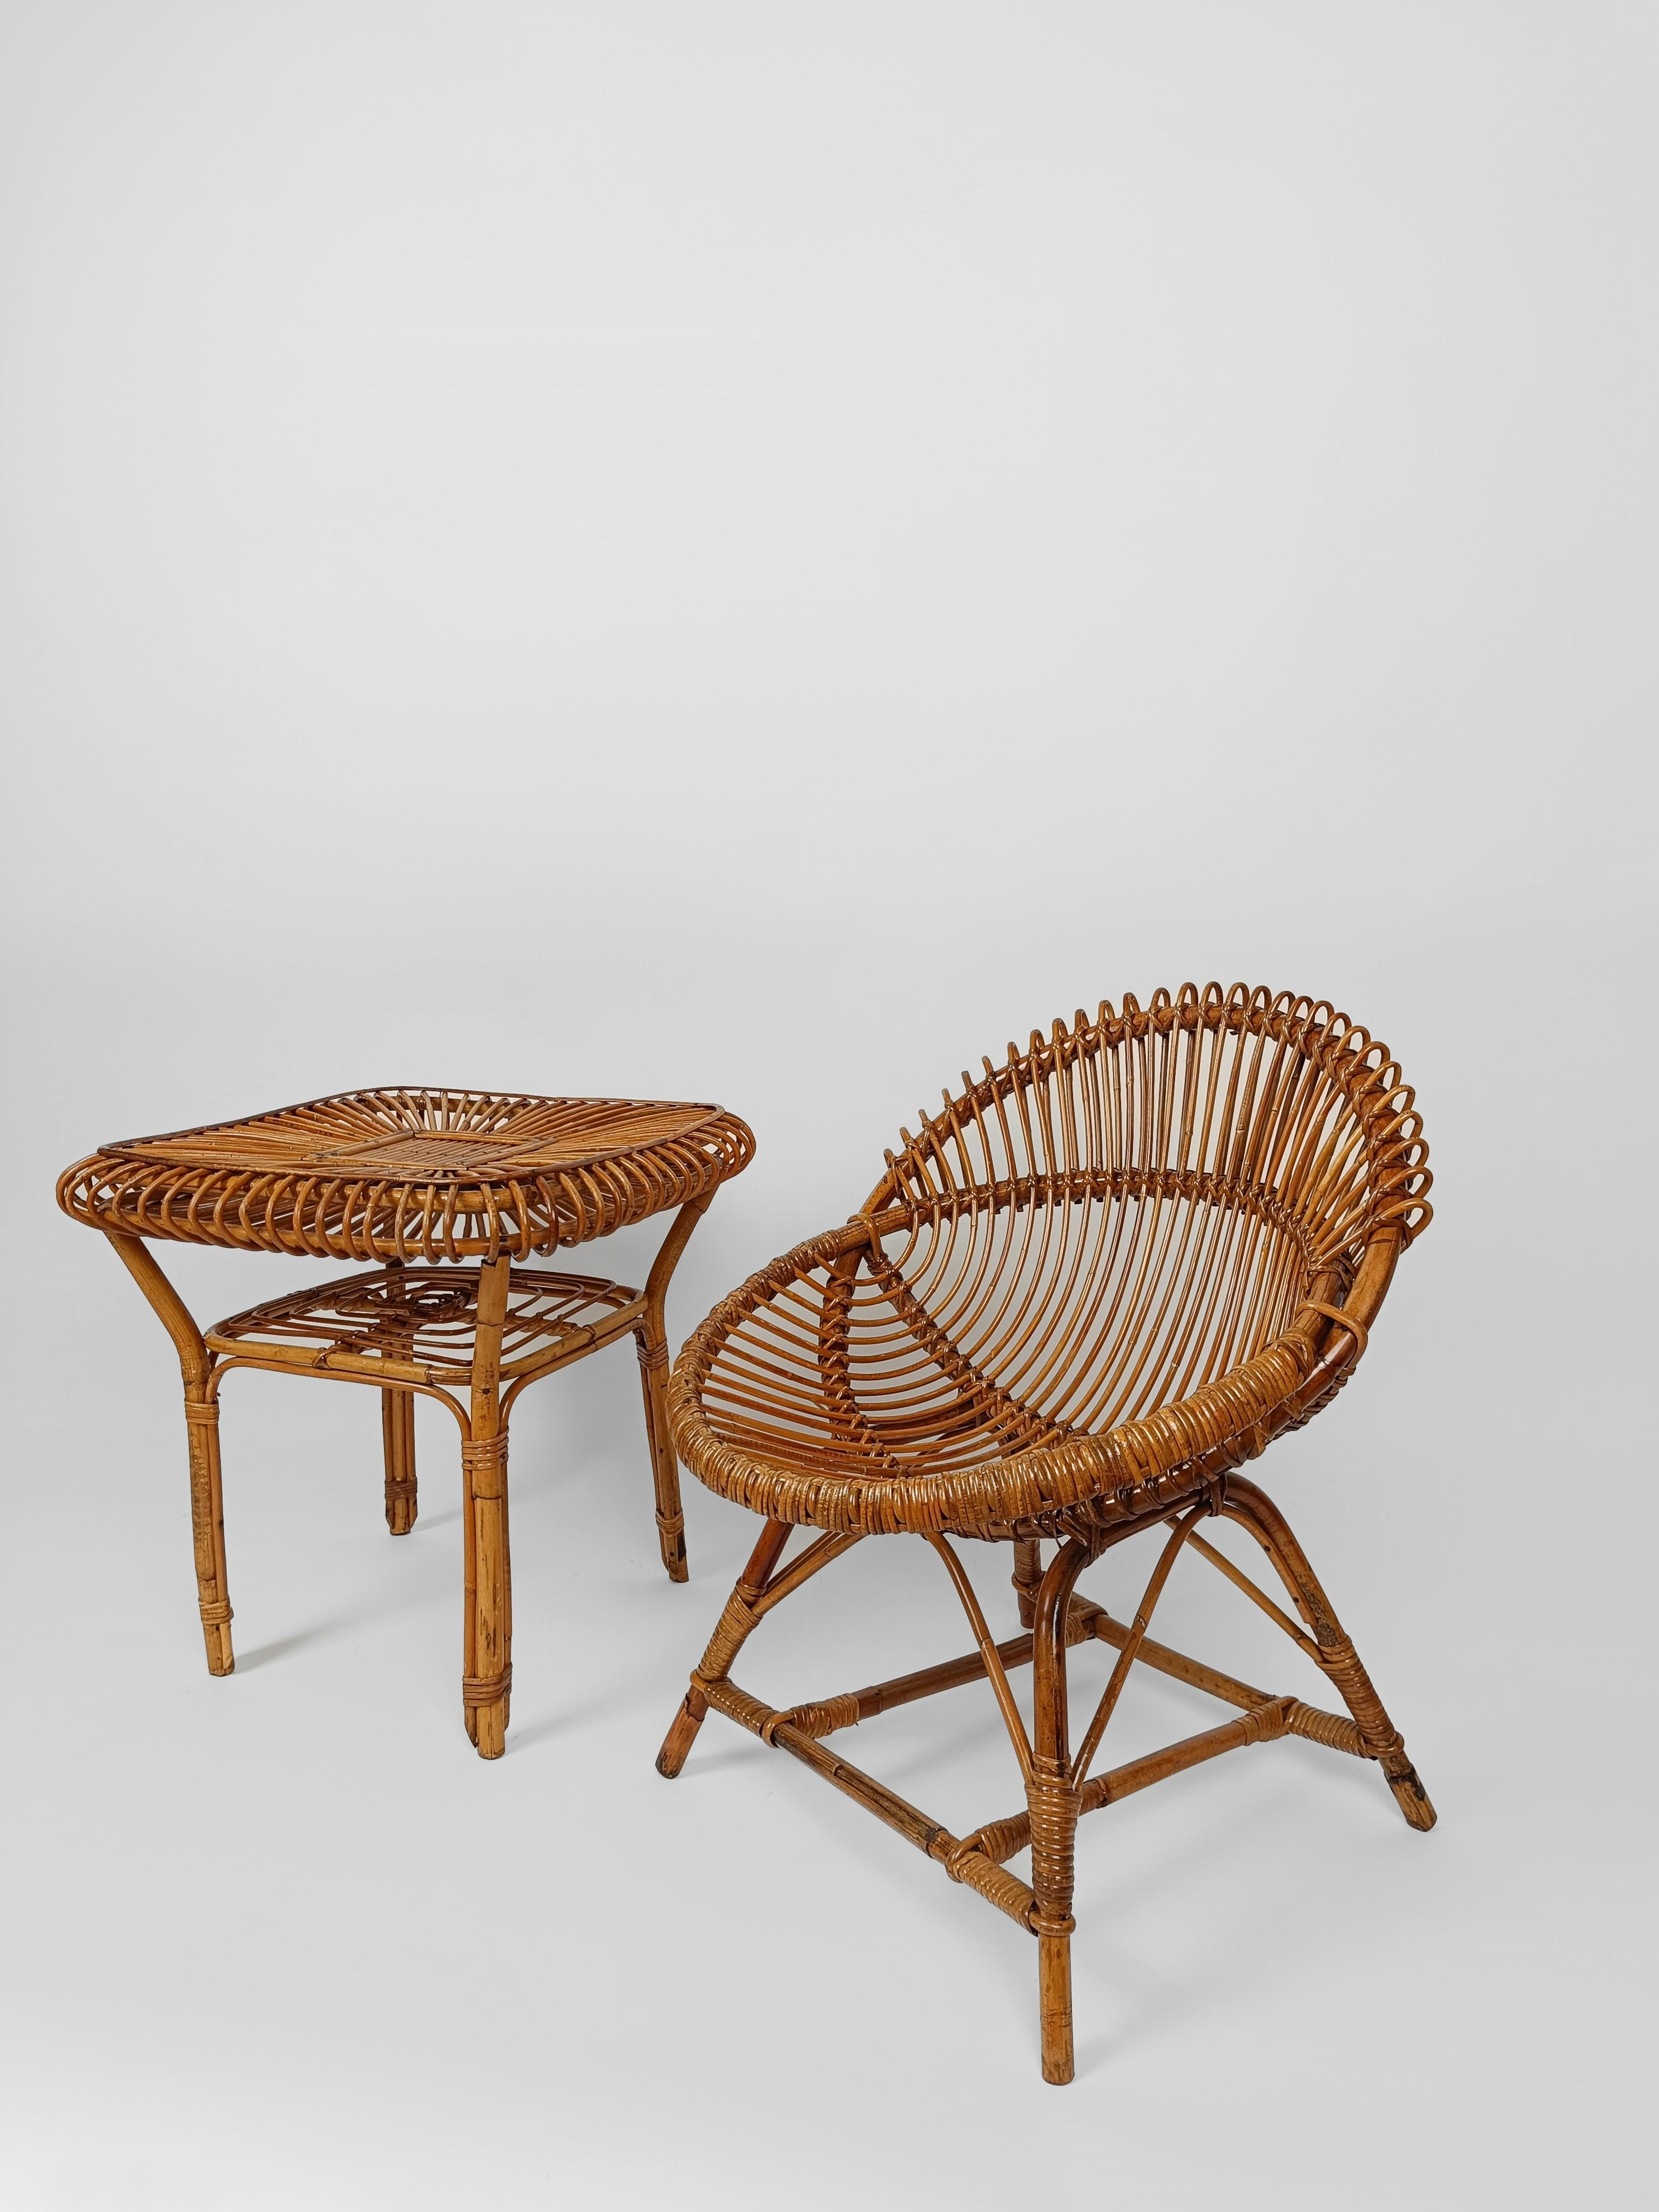 Vintage Cane and Rattan Set of 2 shell-shaped Armchairs with Coffe Table, 1960s For Sale 6